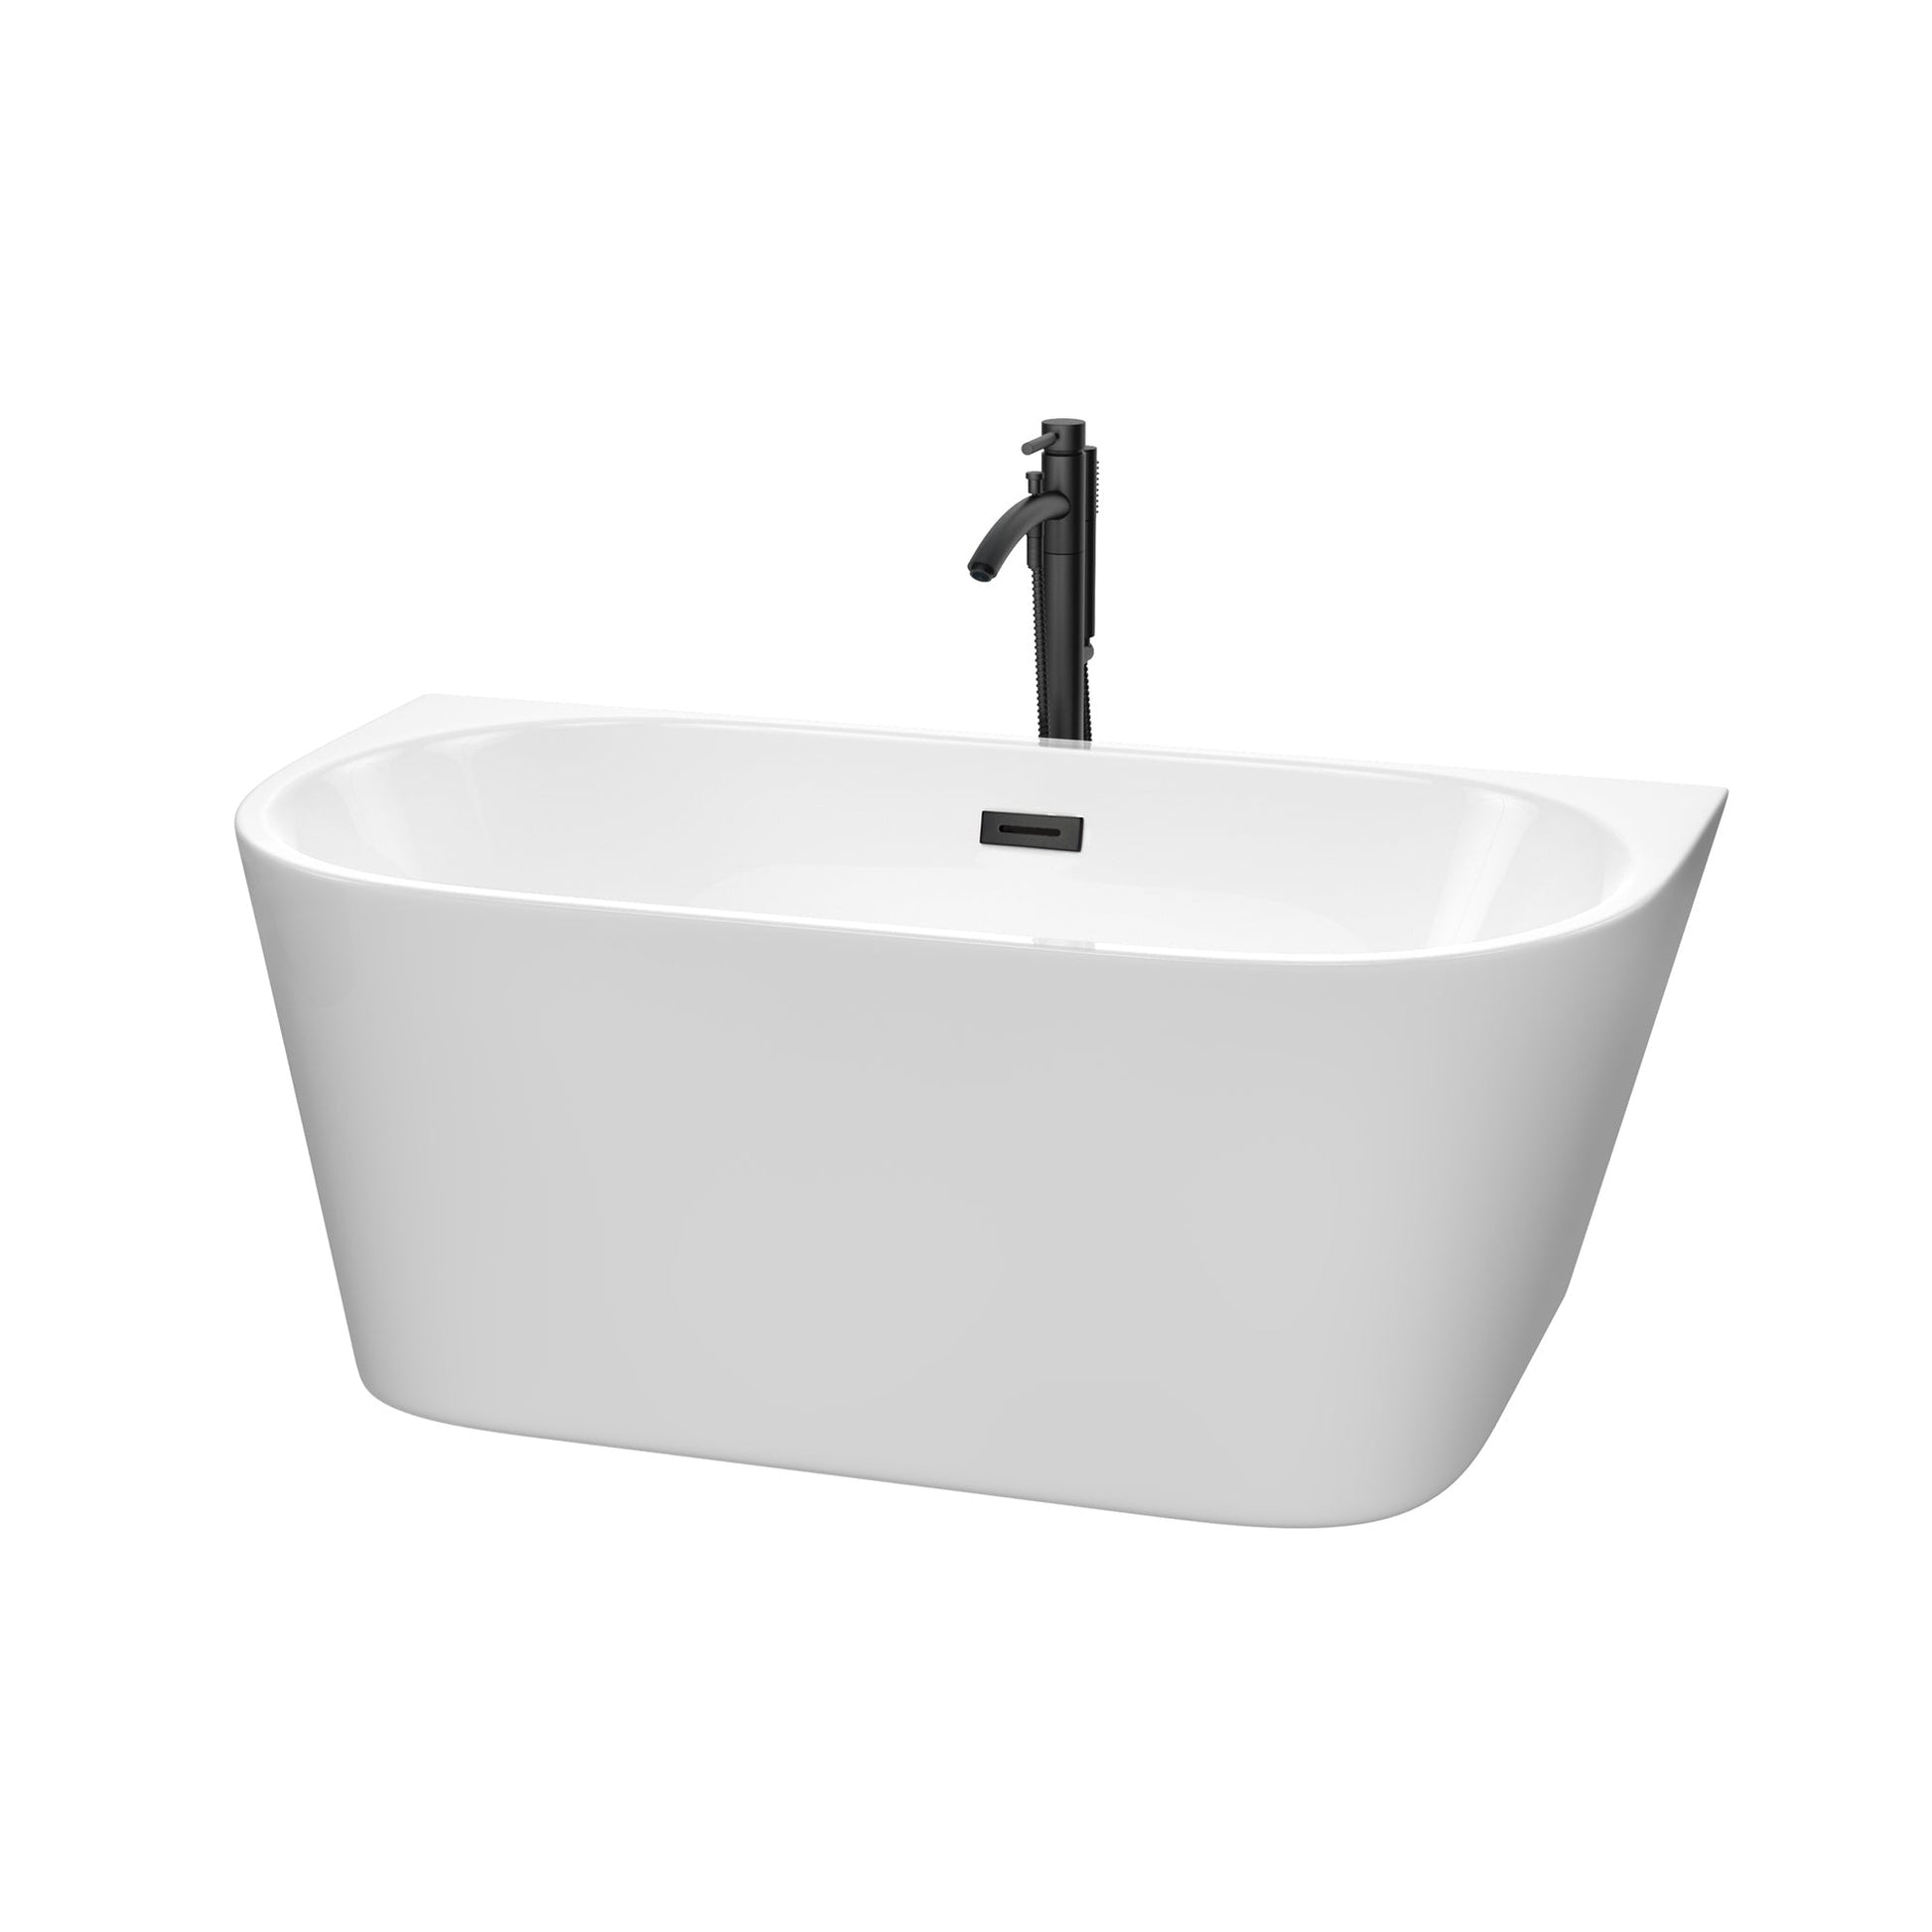 Wyndham Collection Callie 59" Freestanding Bathtub in White With Floor Mounted Faucet, Drain and Overflow Trim in Matte Black